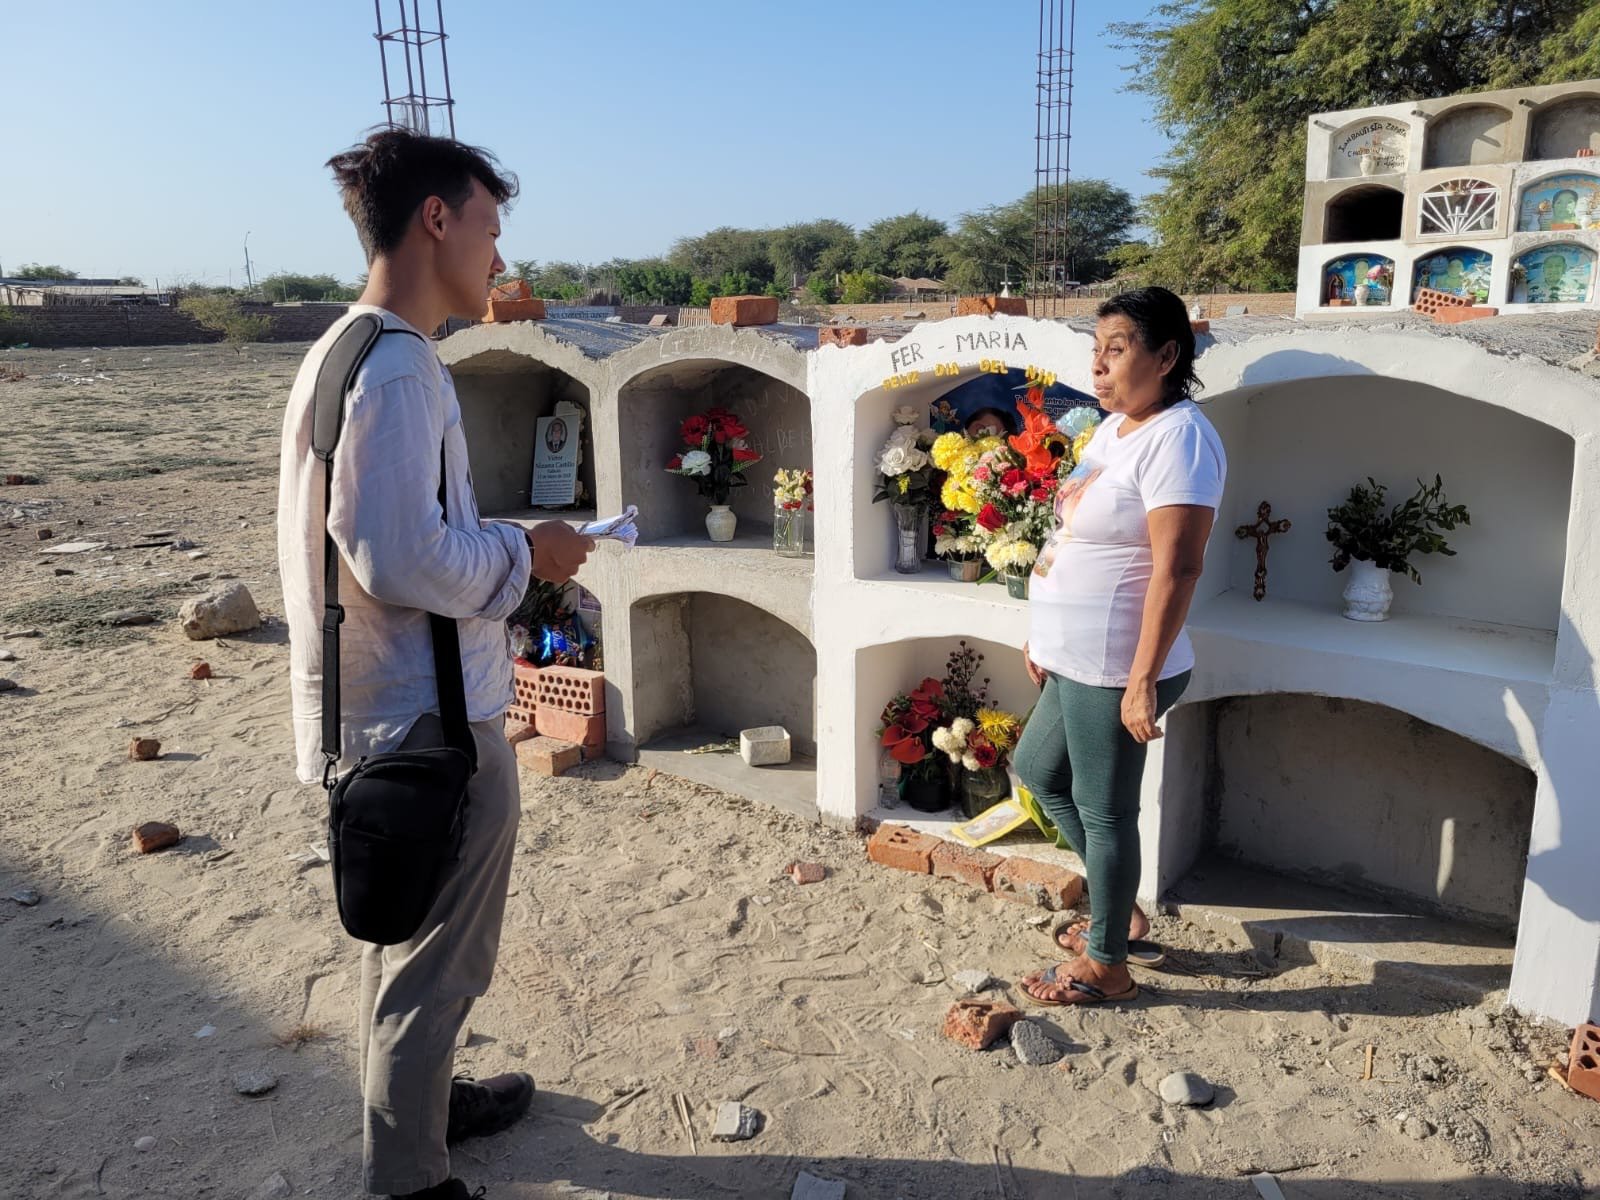 Journalist Peter Yeung talks with a woman in front of a memorial for people who have died from dengue fever in Peru.